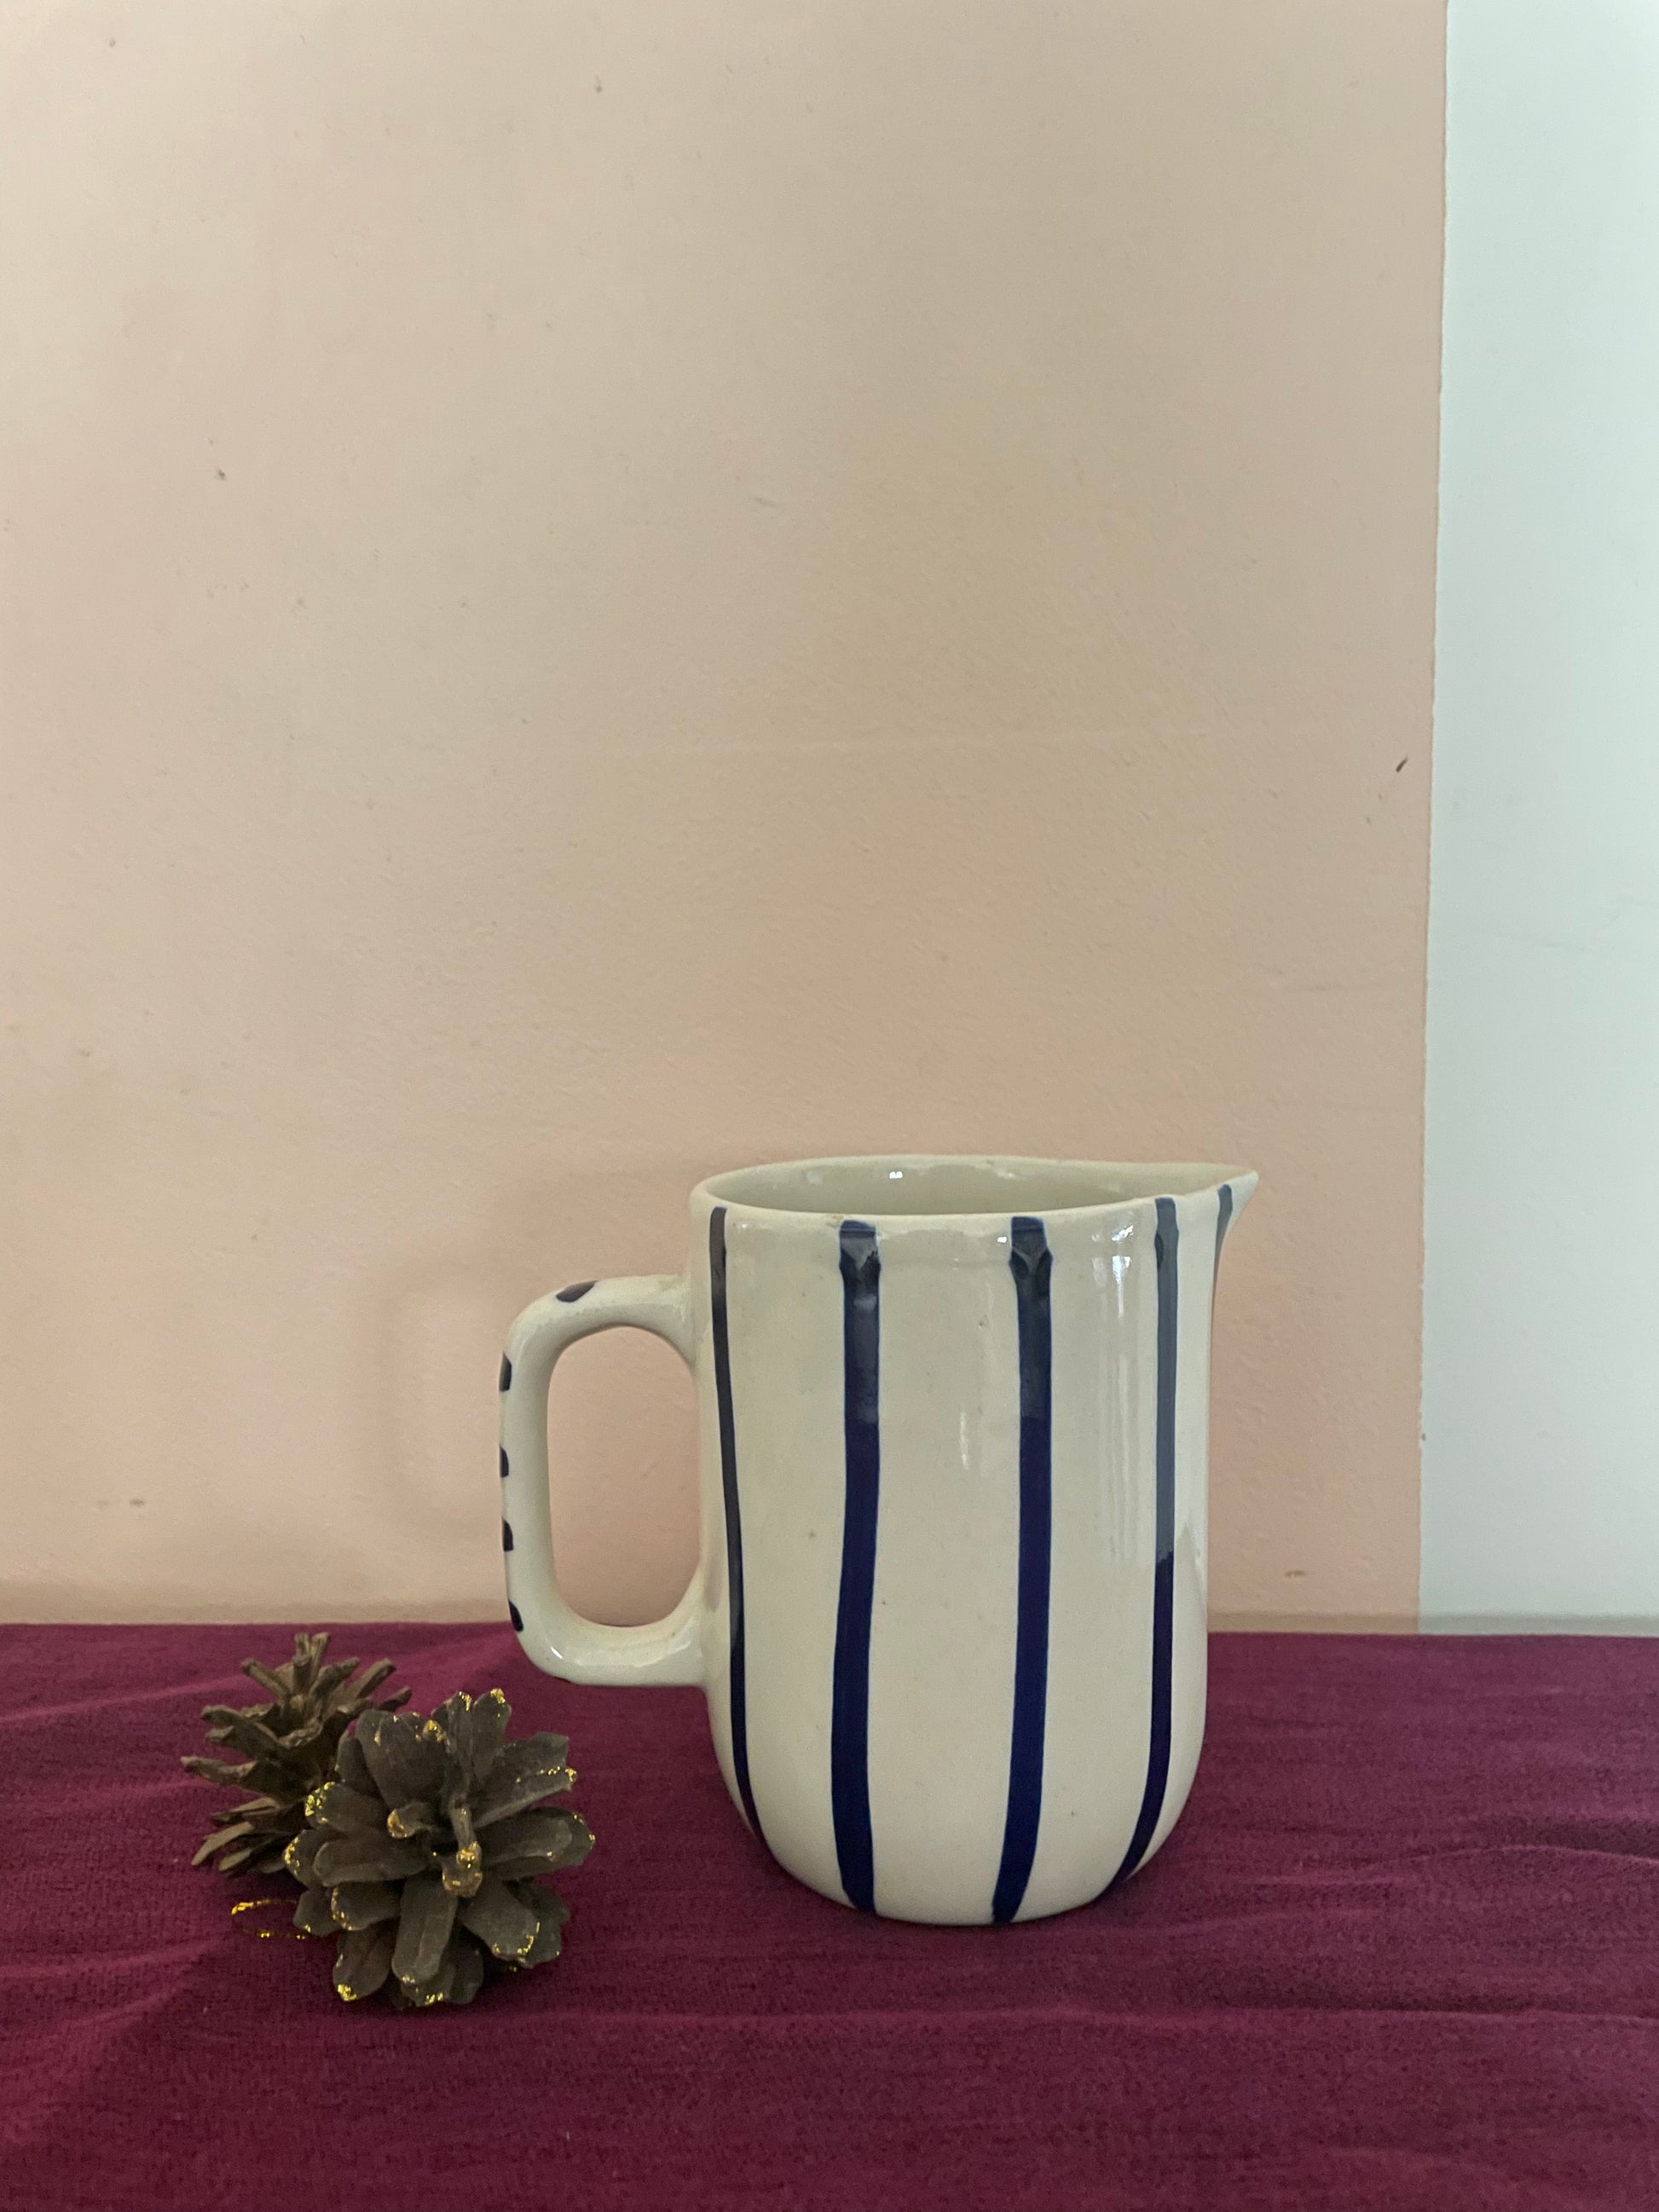 Small off-white ceramic jug with handle, hand-painted thin blue stripes kept on purple cloth with pine cones. Explore unique gifting ideas Bangalore.